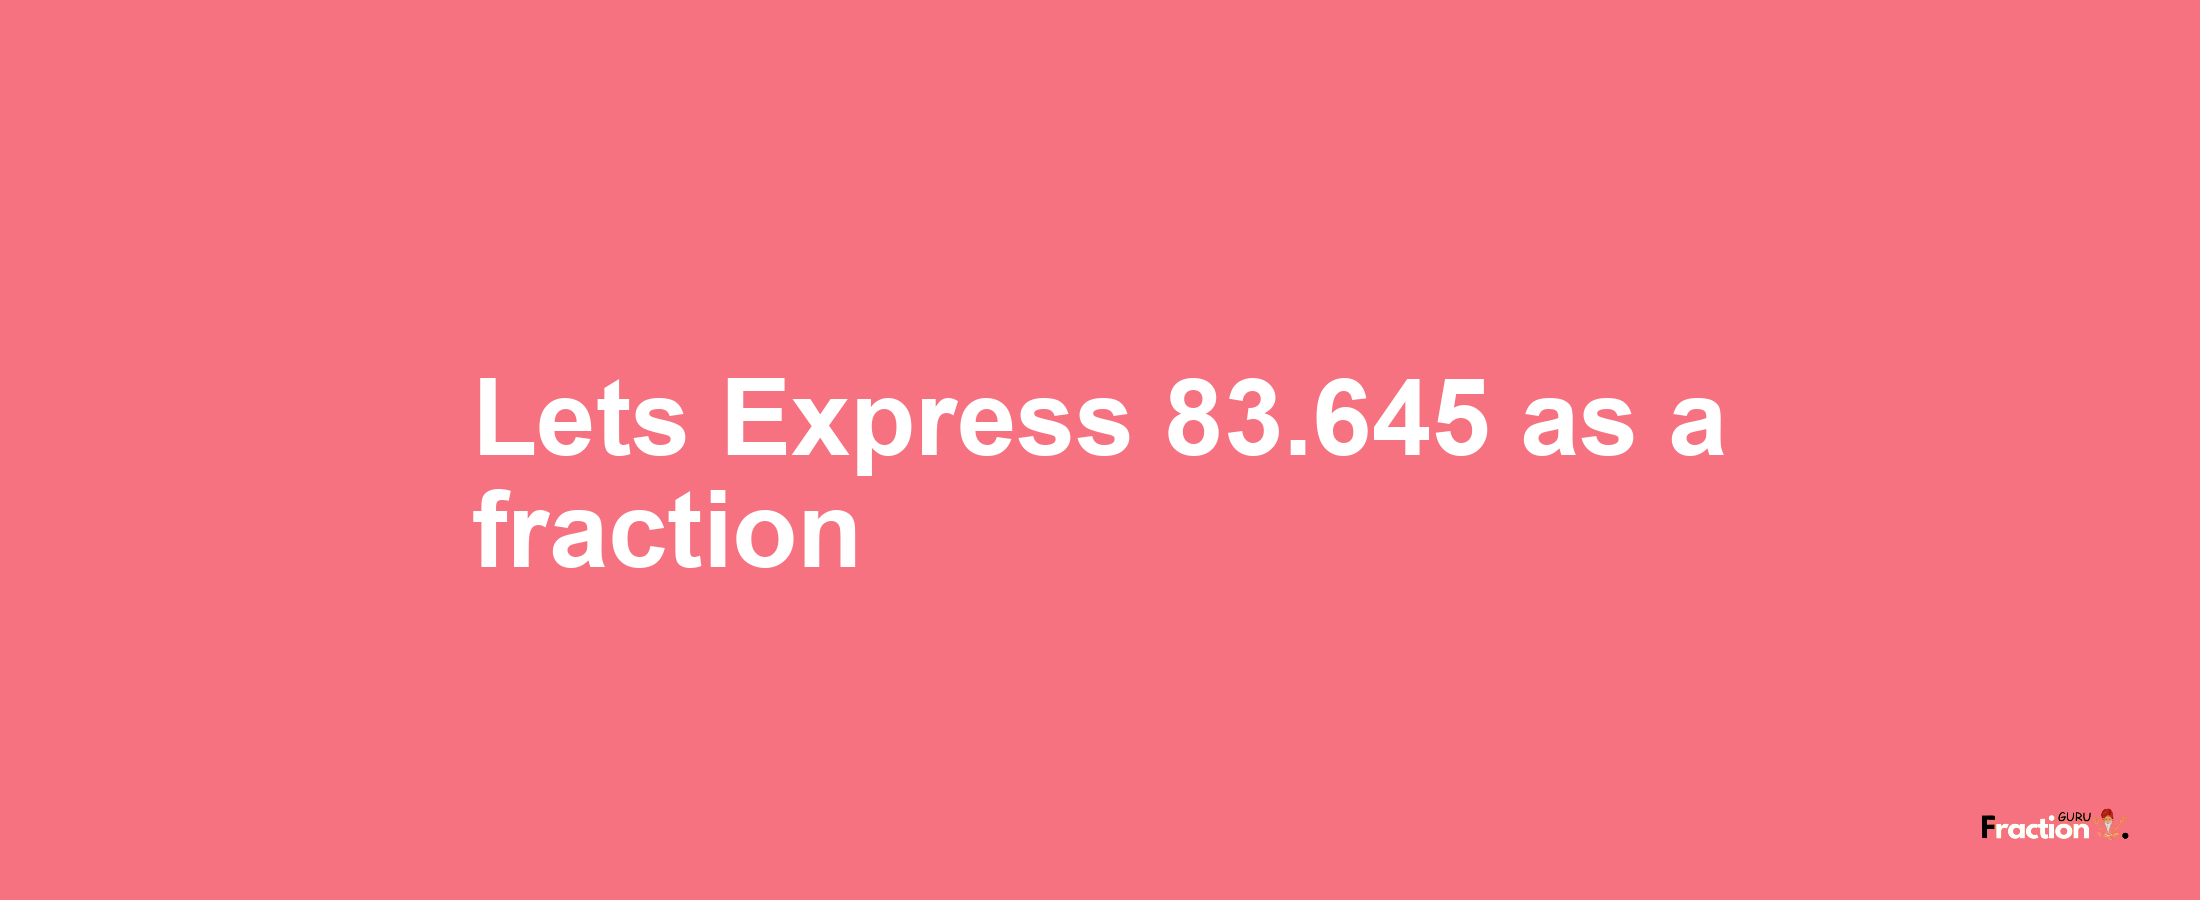 Lets Express 83.645 as afraction